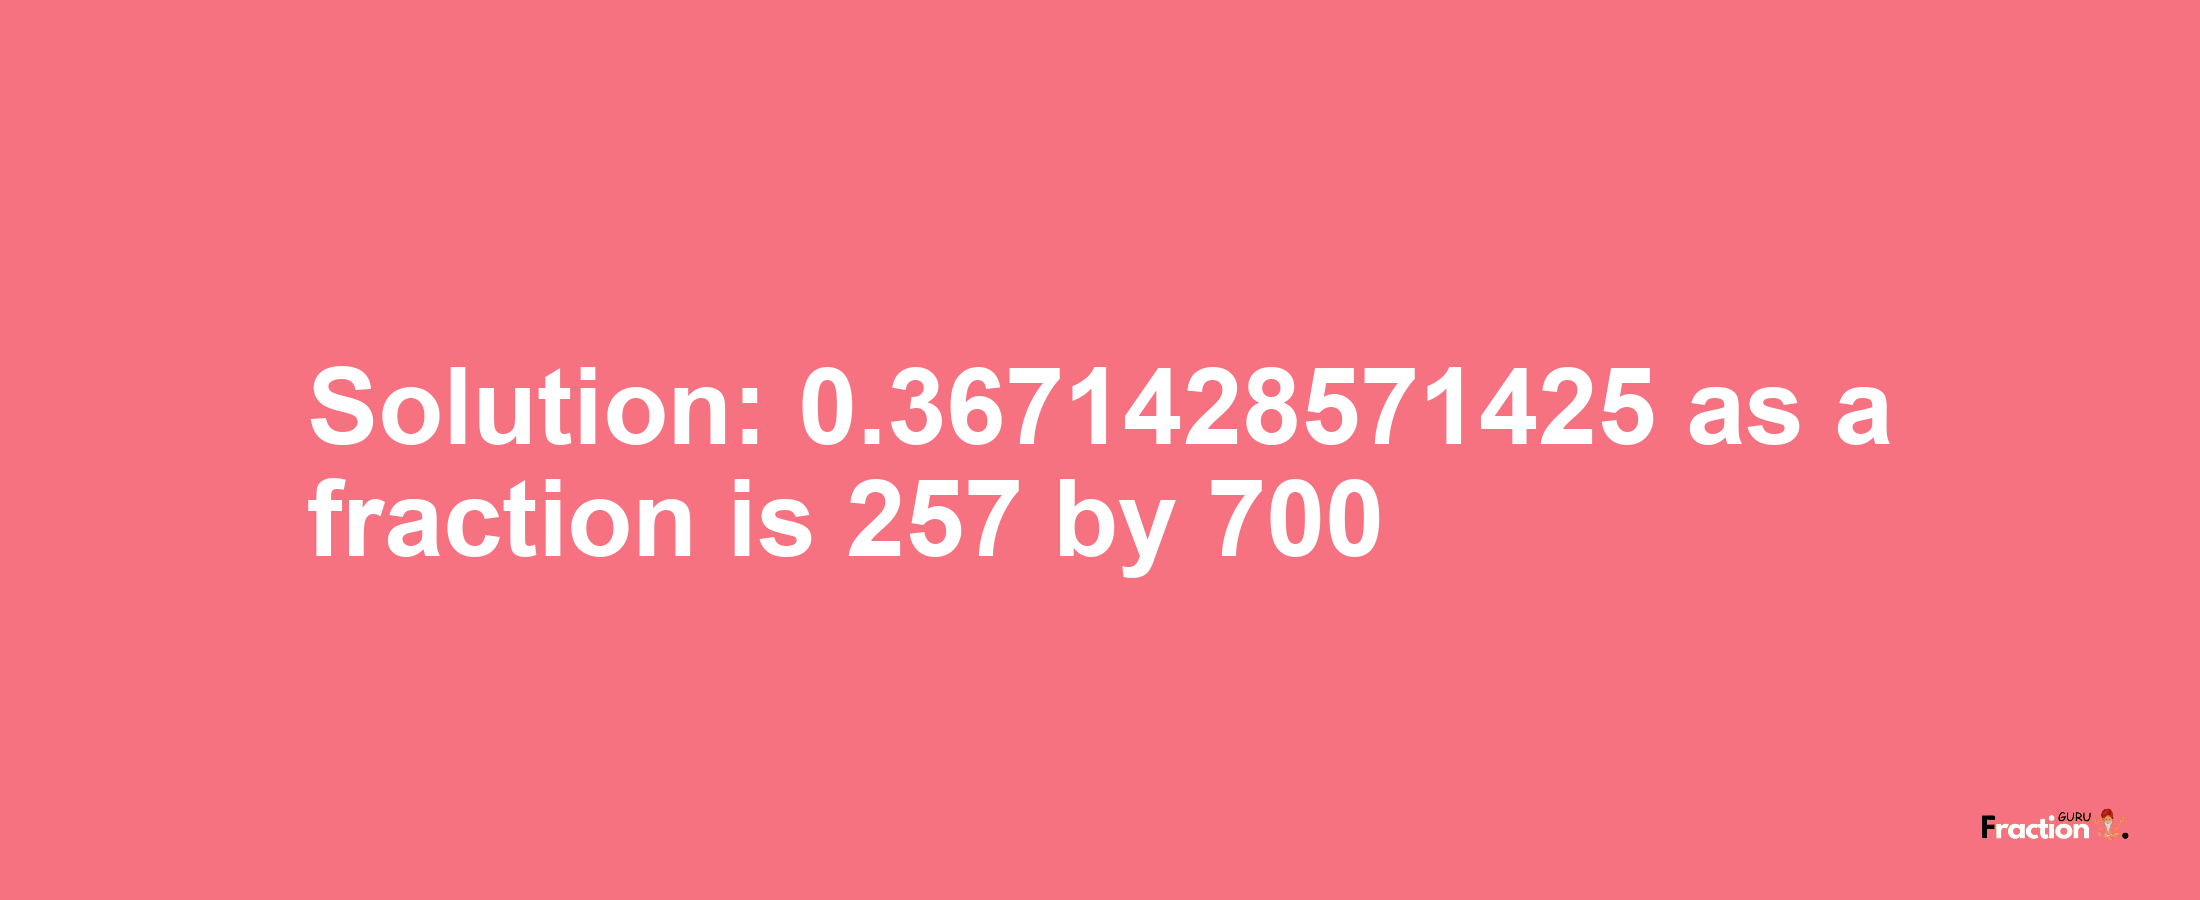 Solution:0.3671428571425 as a fraction is 257/700